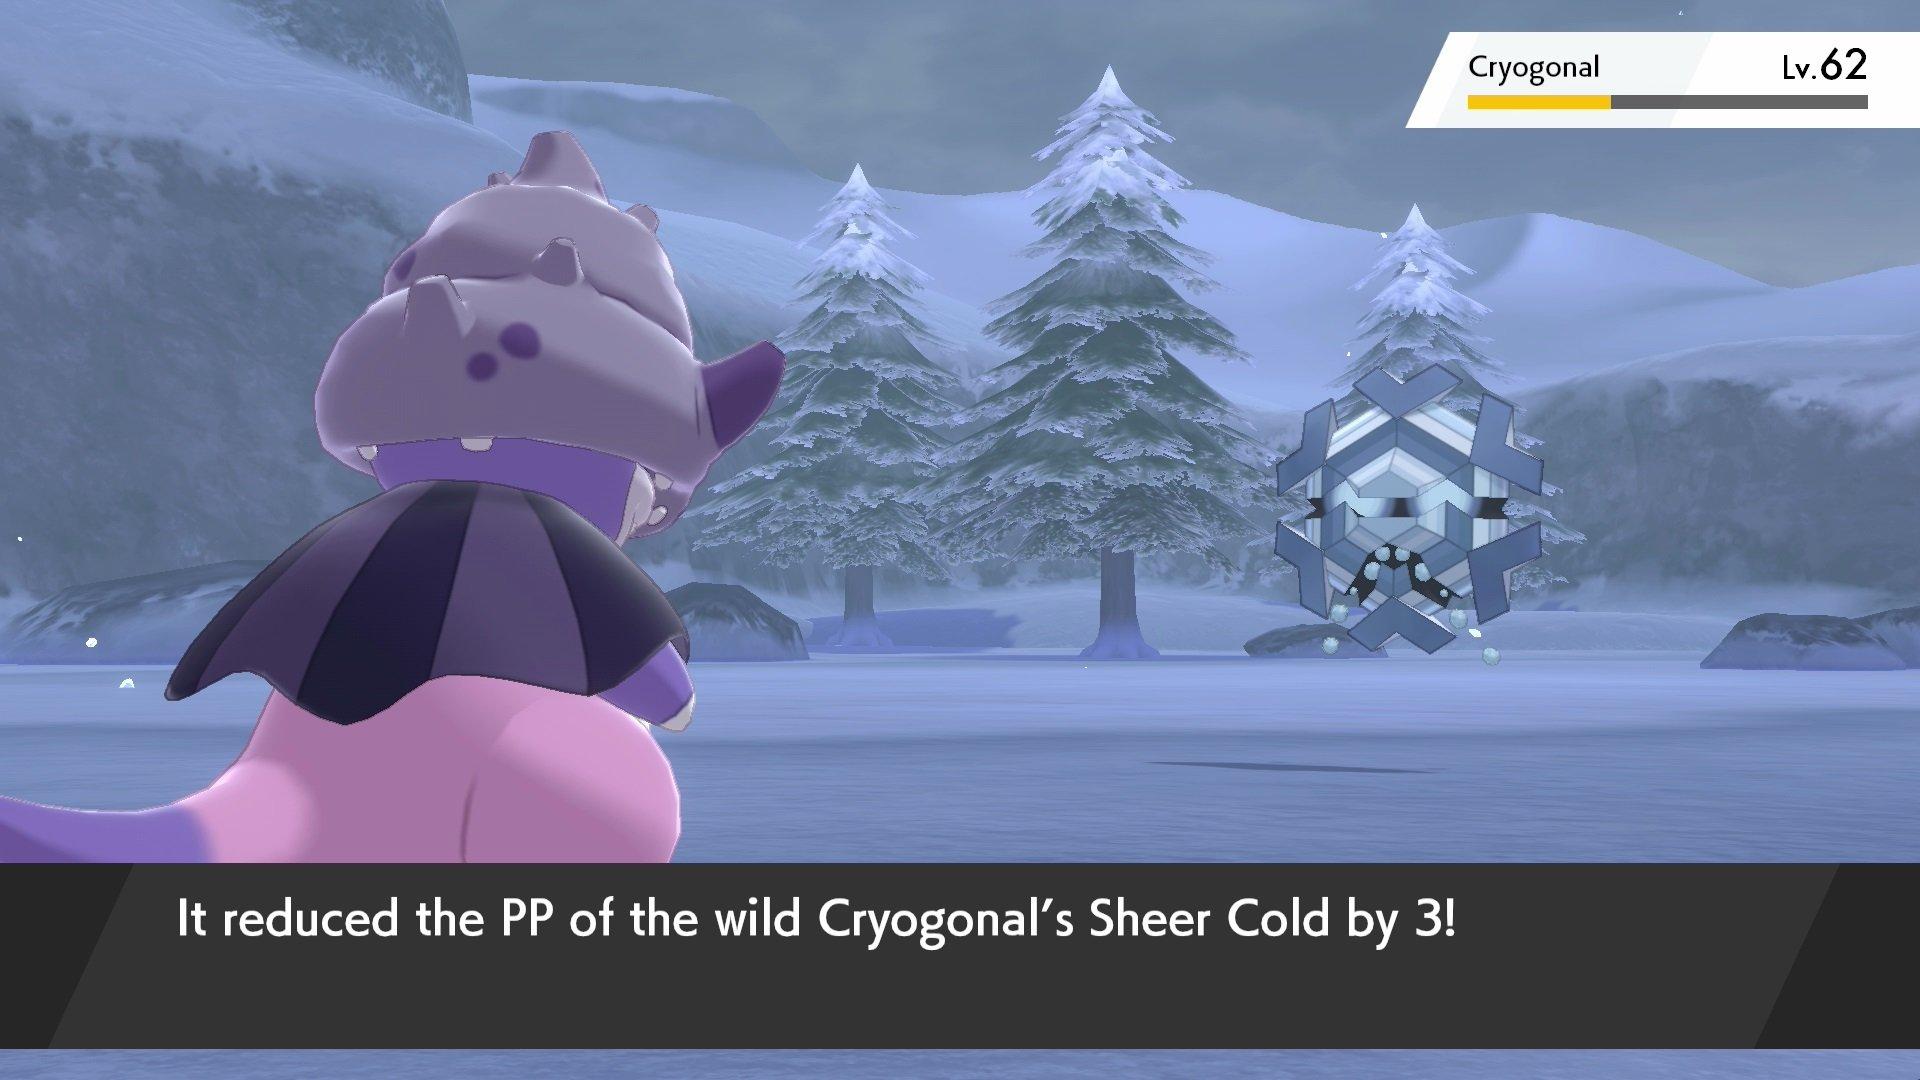 Pokemon Sword & Shield Trailer Shares New Expansion Pass Part 1 Info